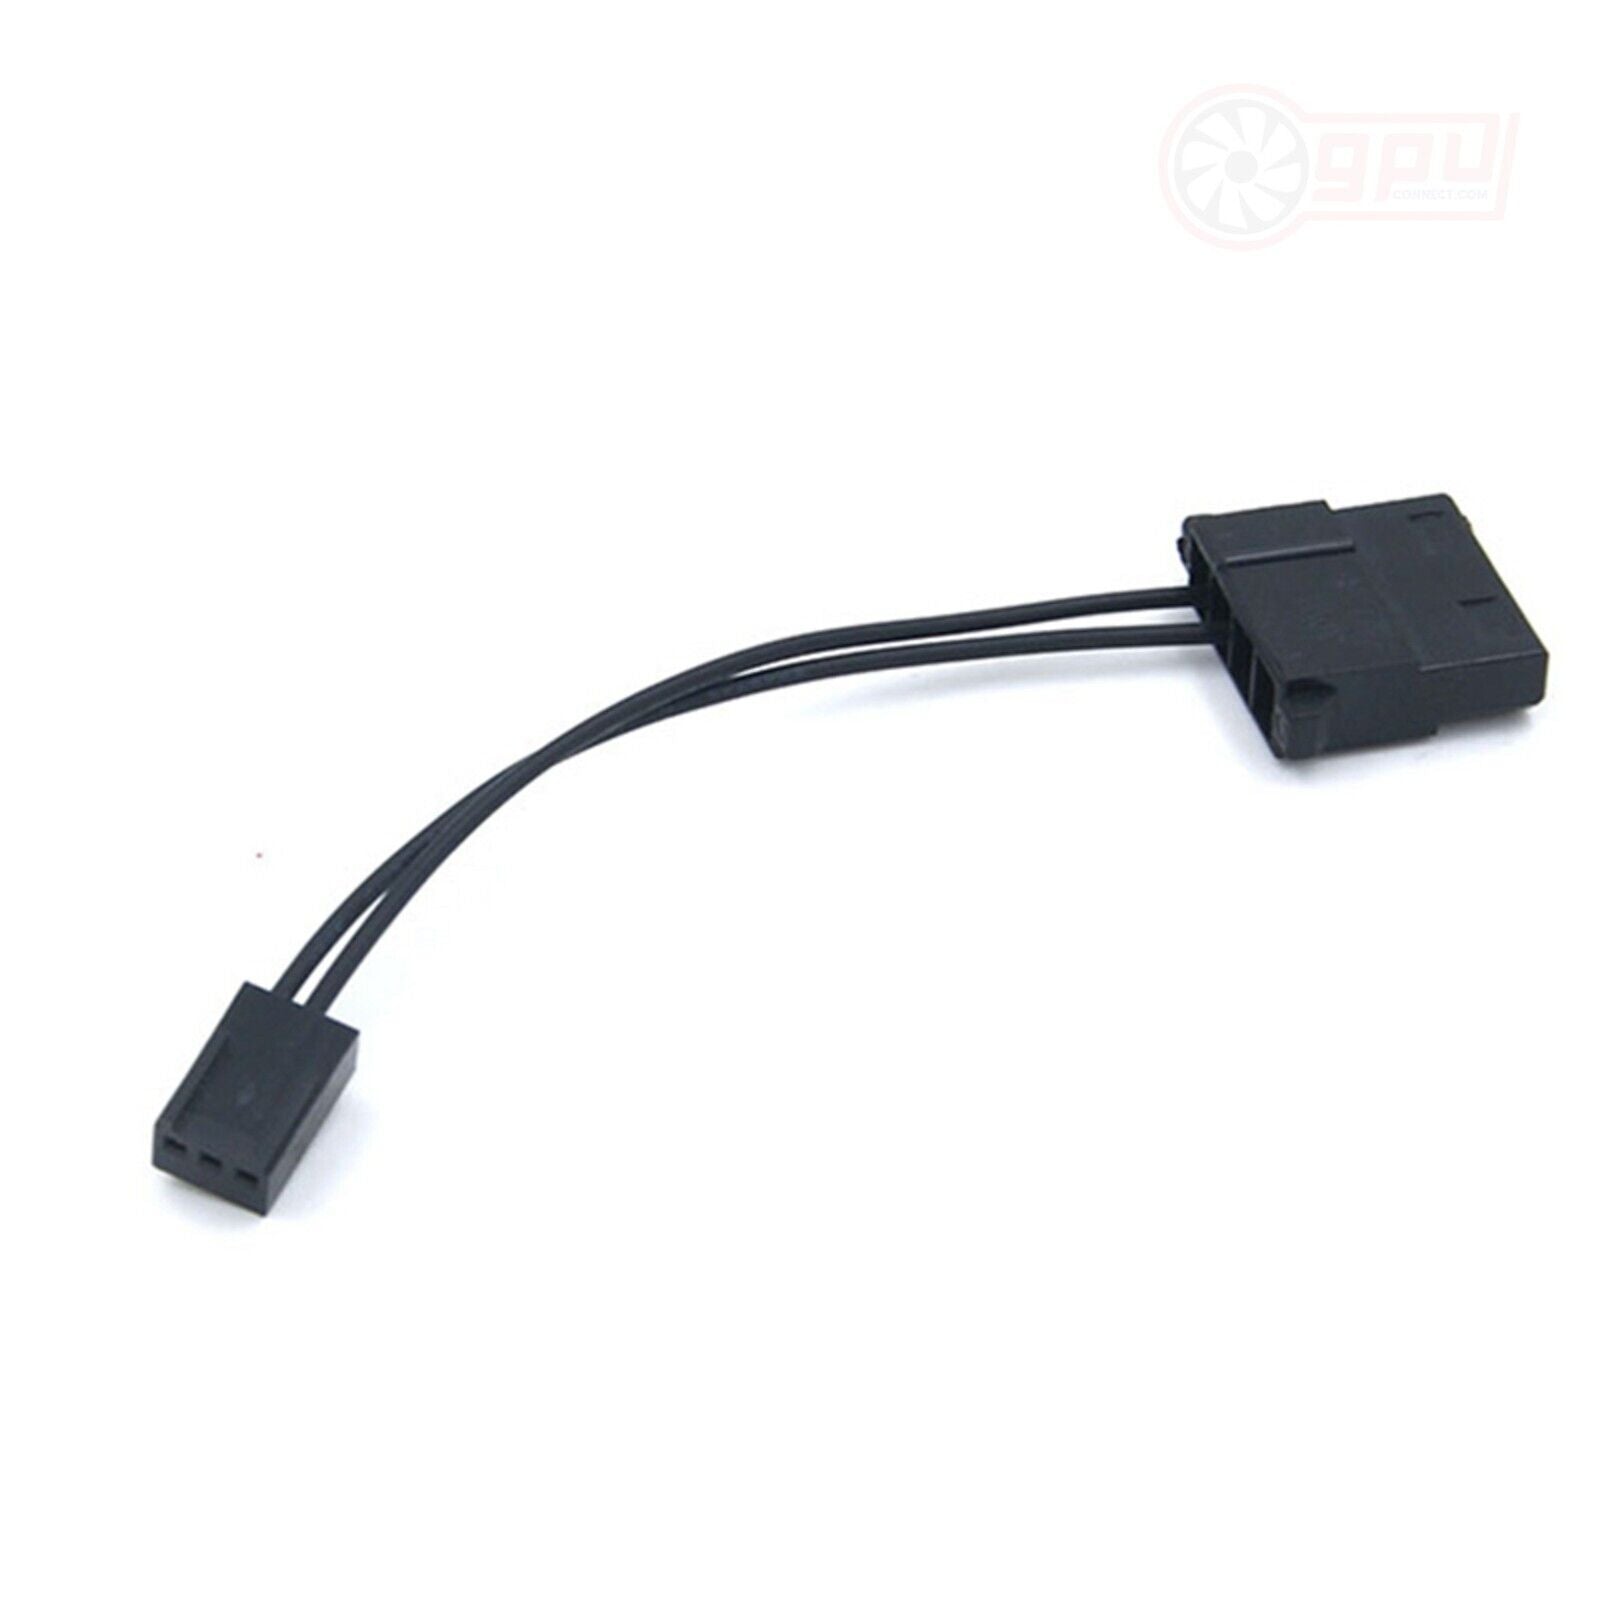 12V PWM Fan Header to IDE Molex Fan Power Adapter Cable Connector Converter PSU - GPUCONNECT.COM